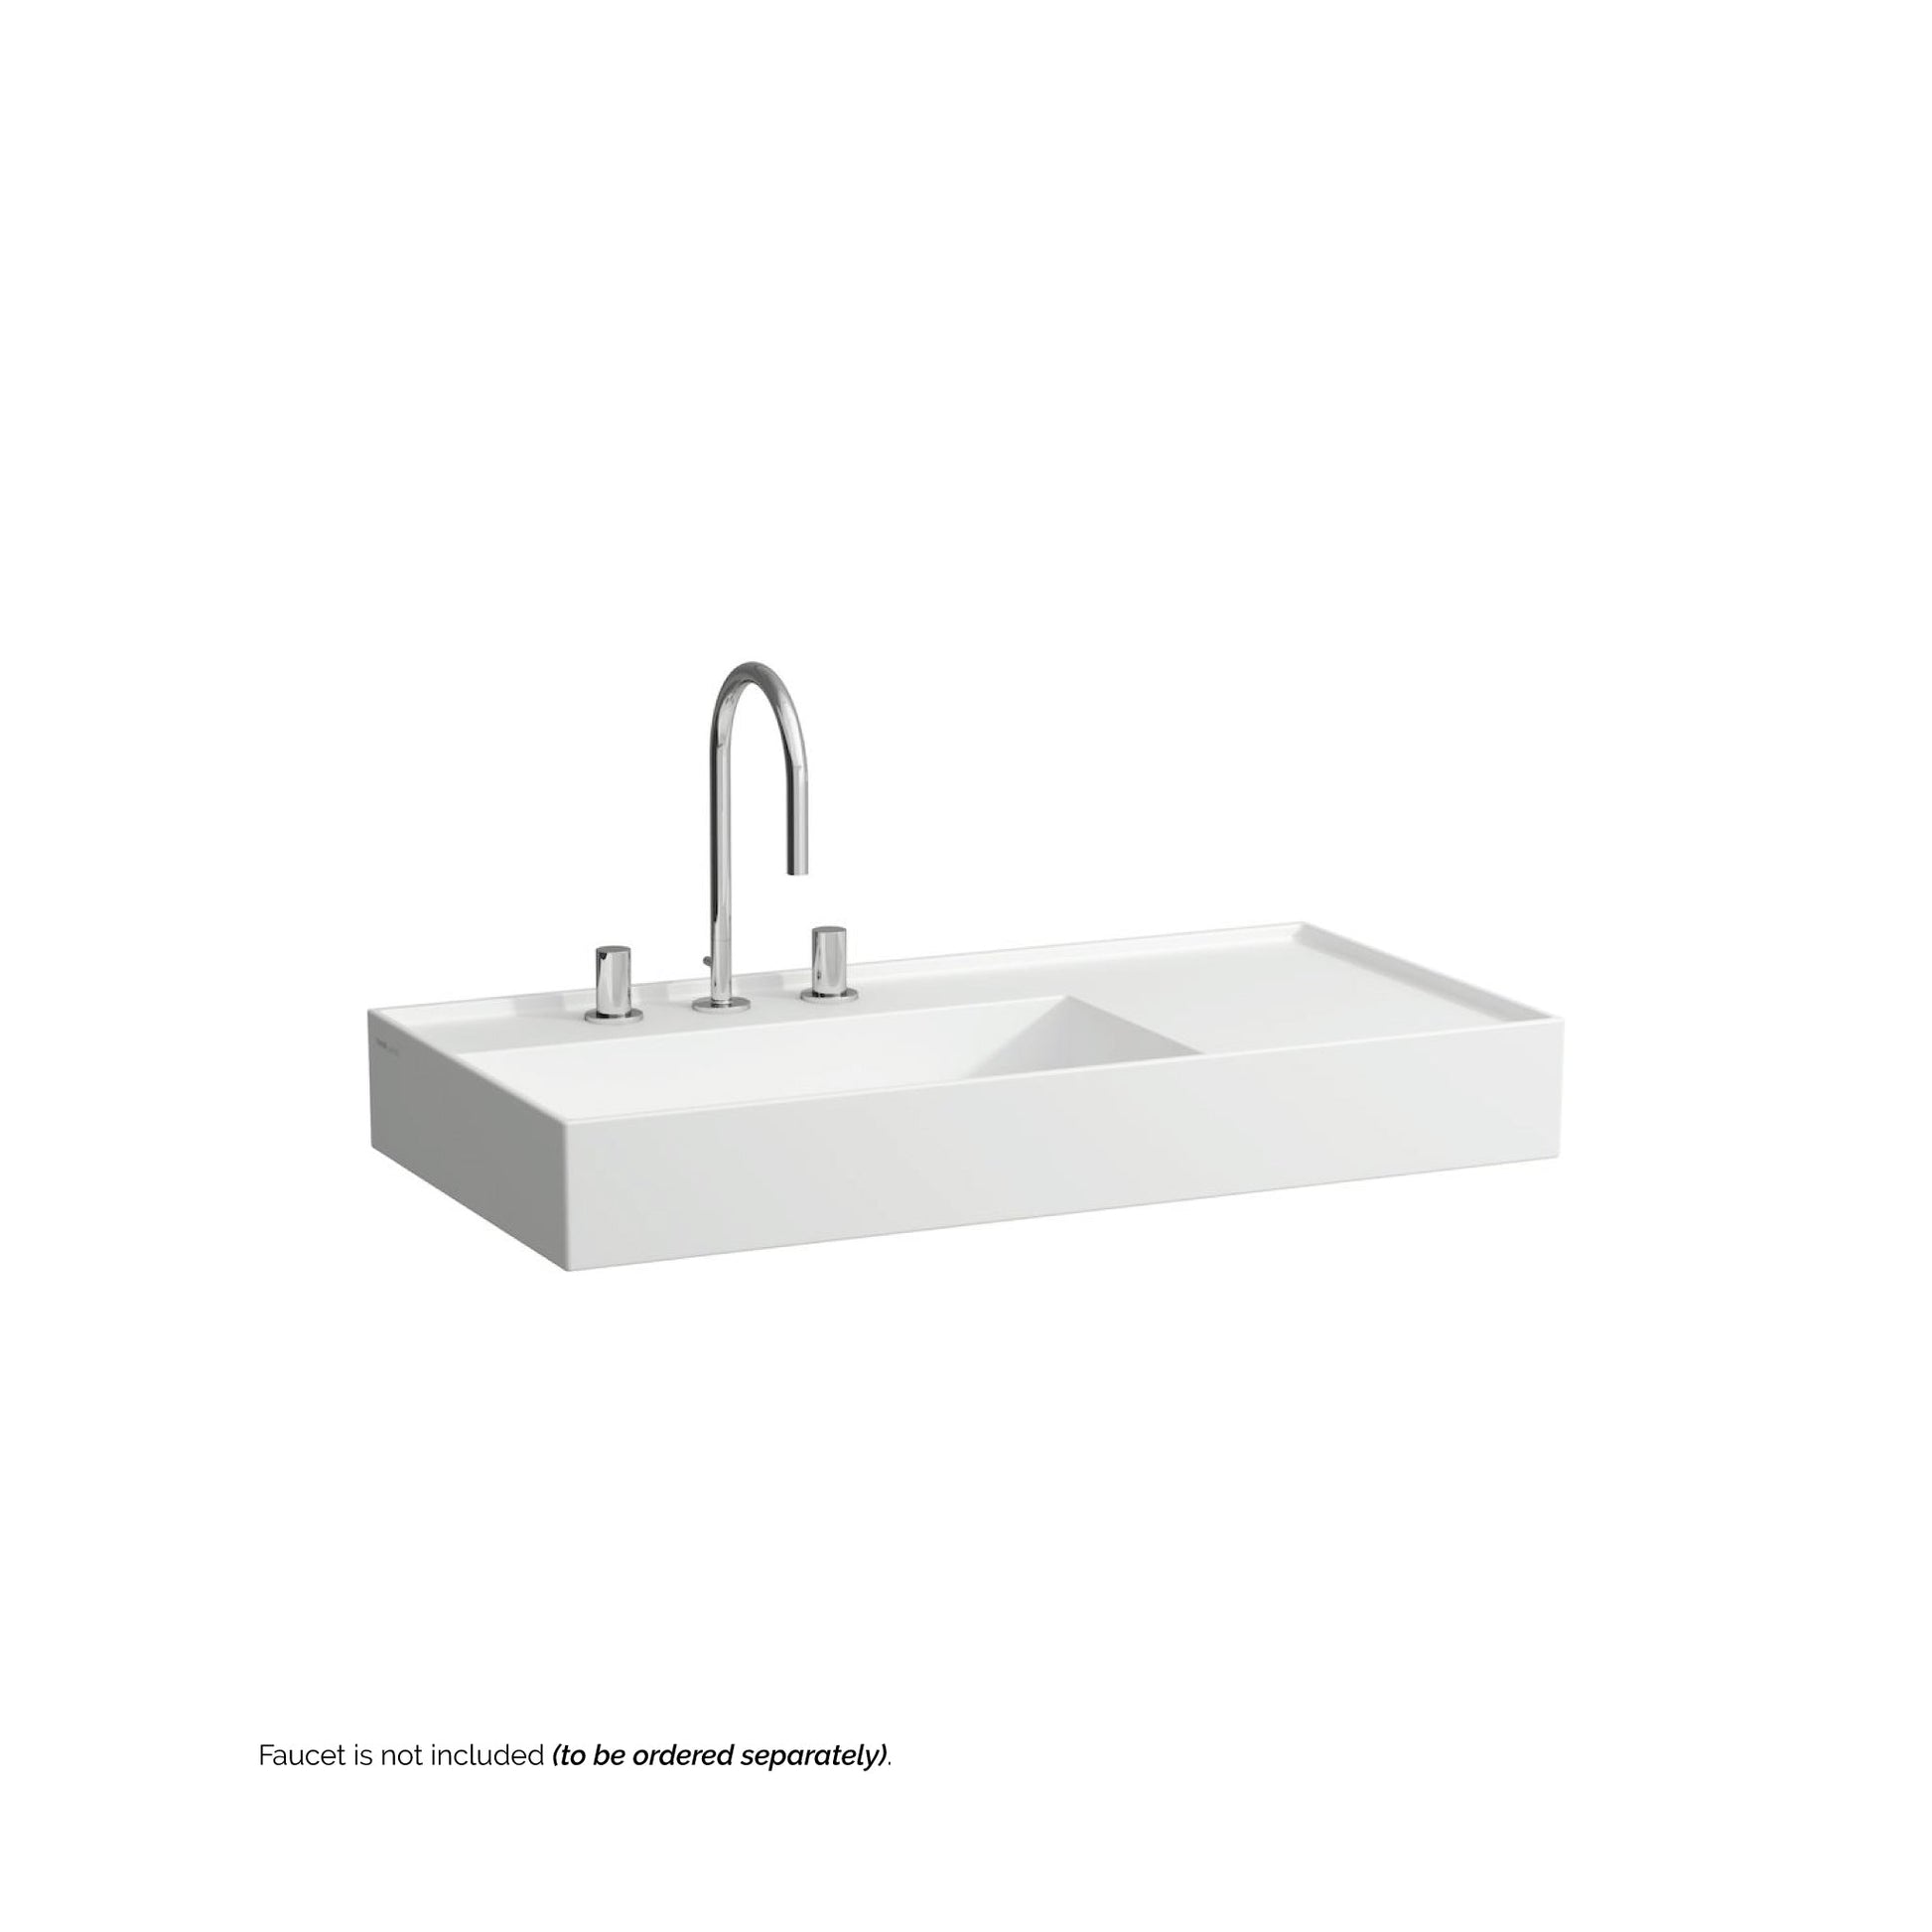 Laufen Kartell 35" x 18" Matte White Wall-Mounted Shelf-Right Bathroom Sink With 3 Faucet Holes